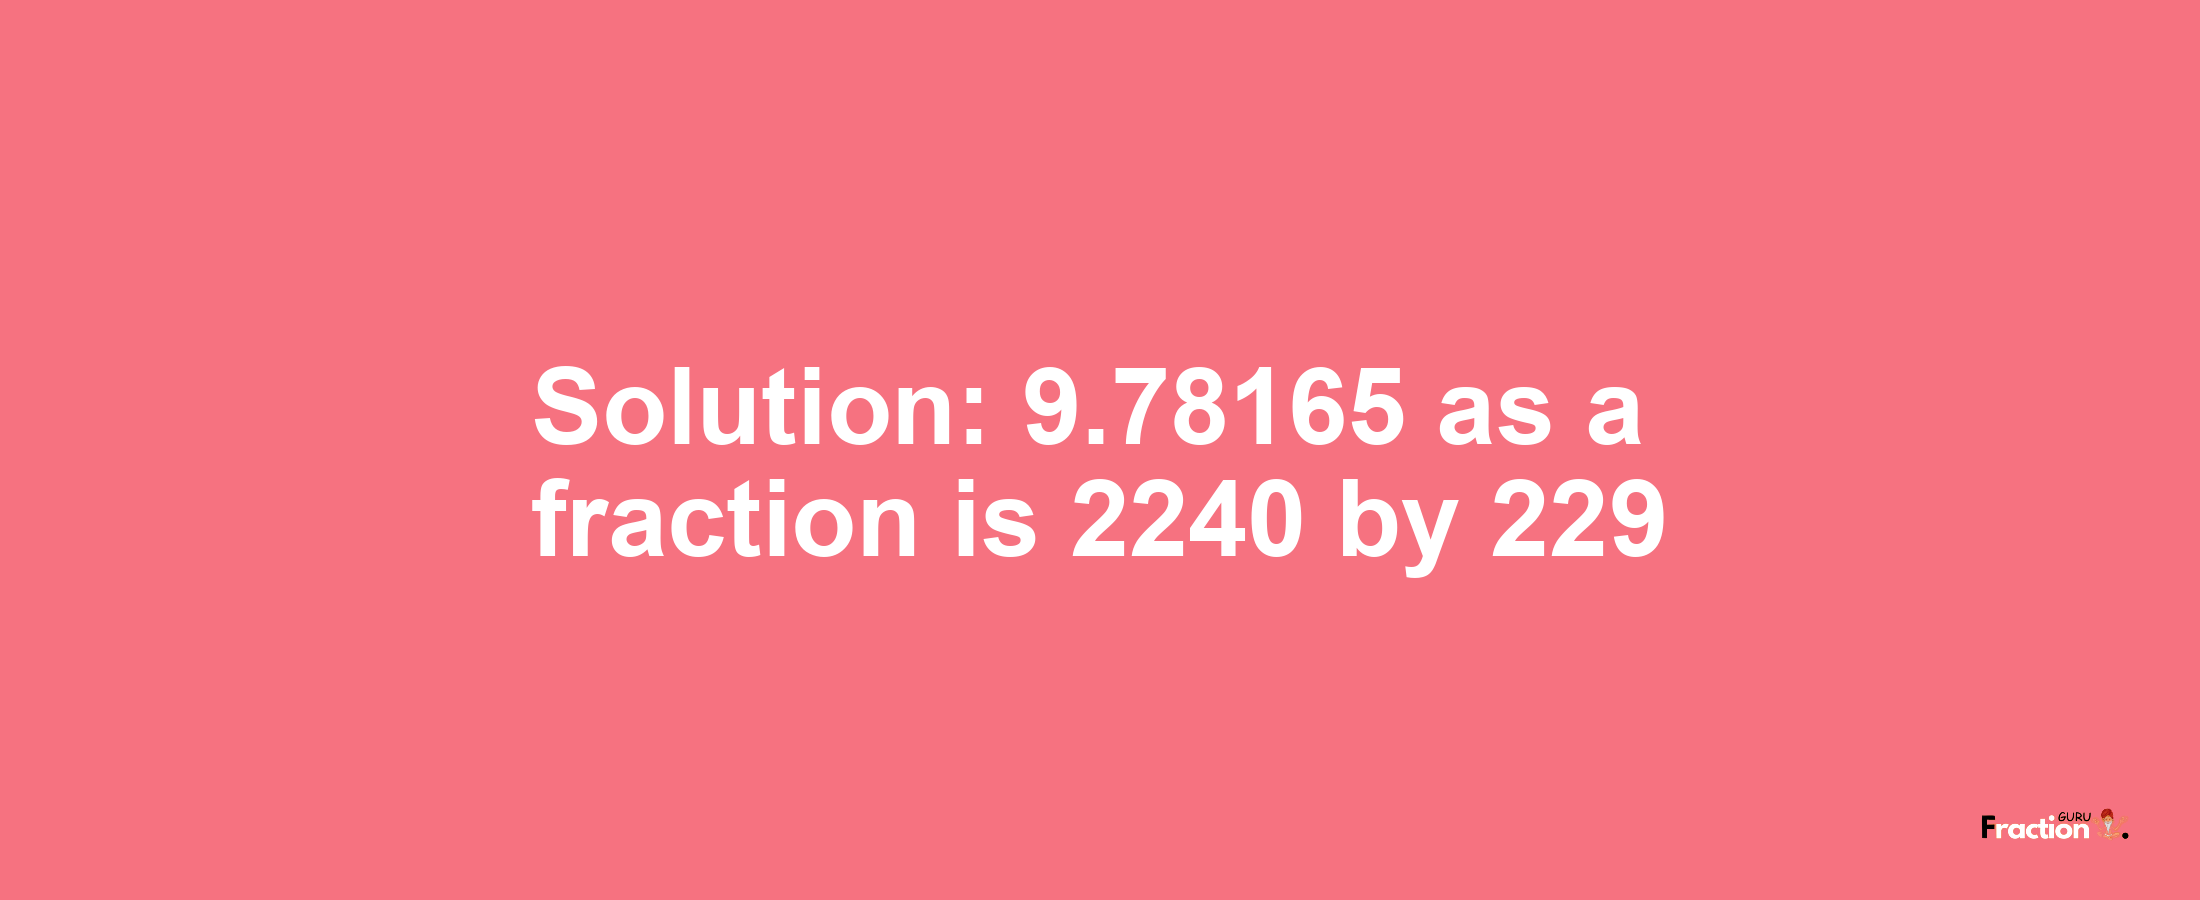 Solution:9.78165 as a fraction is 2240/229